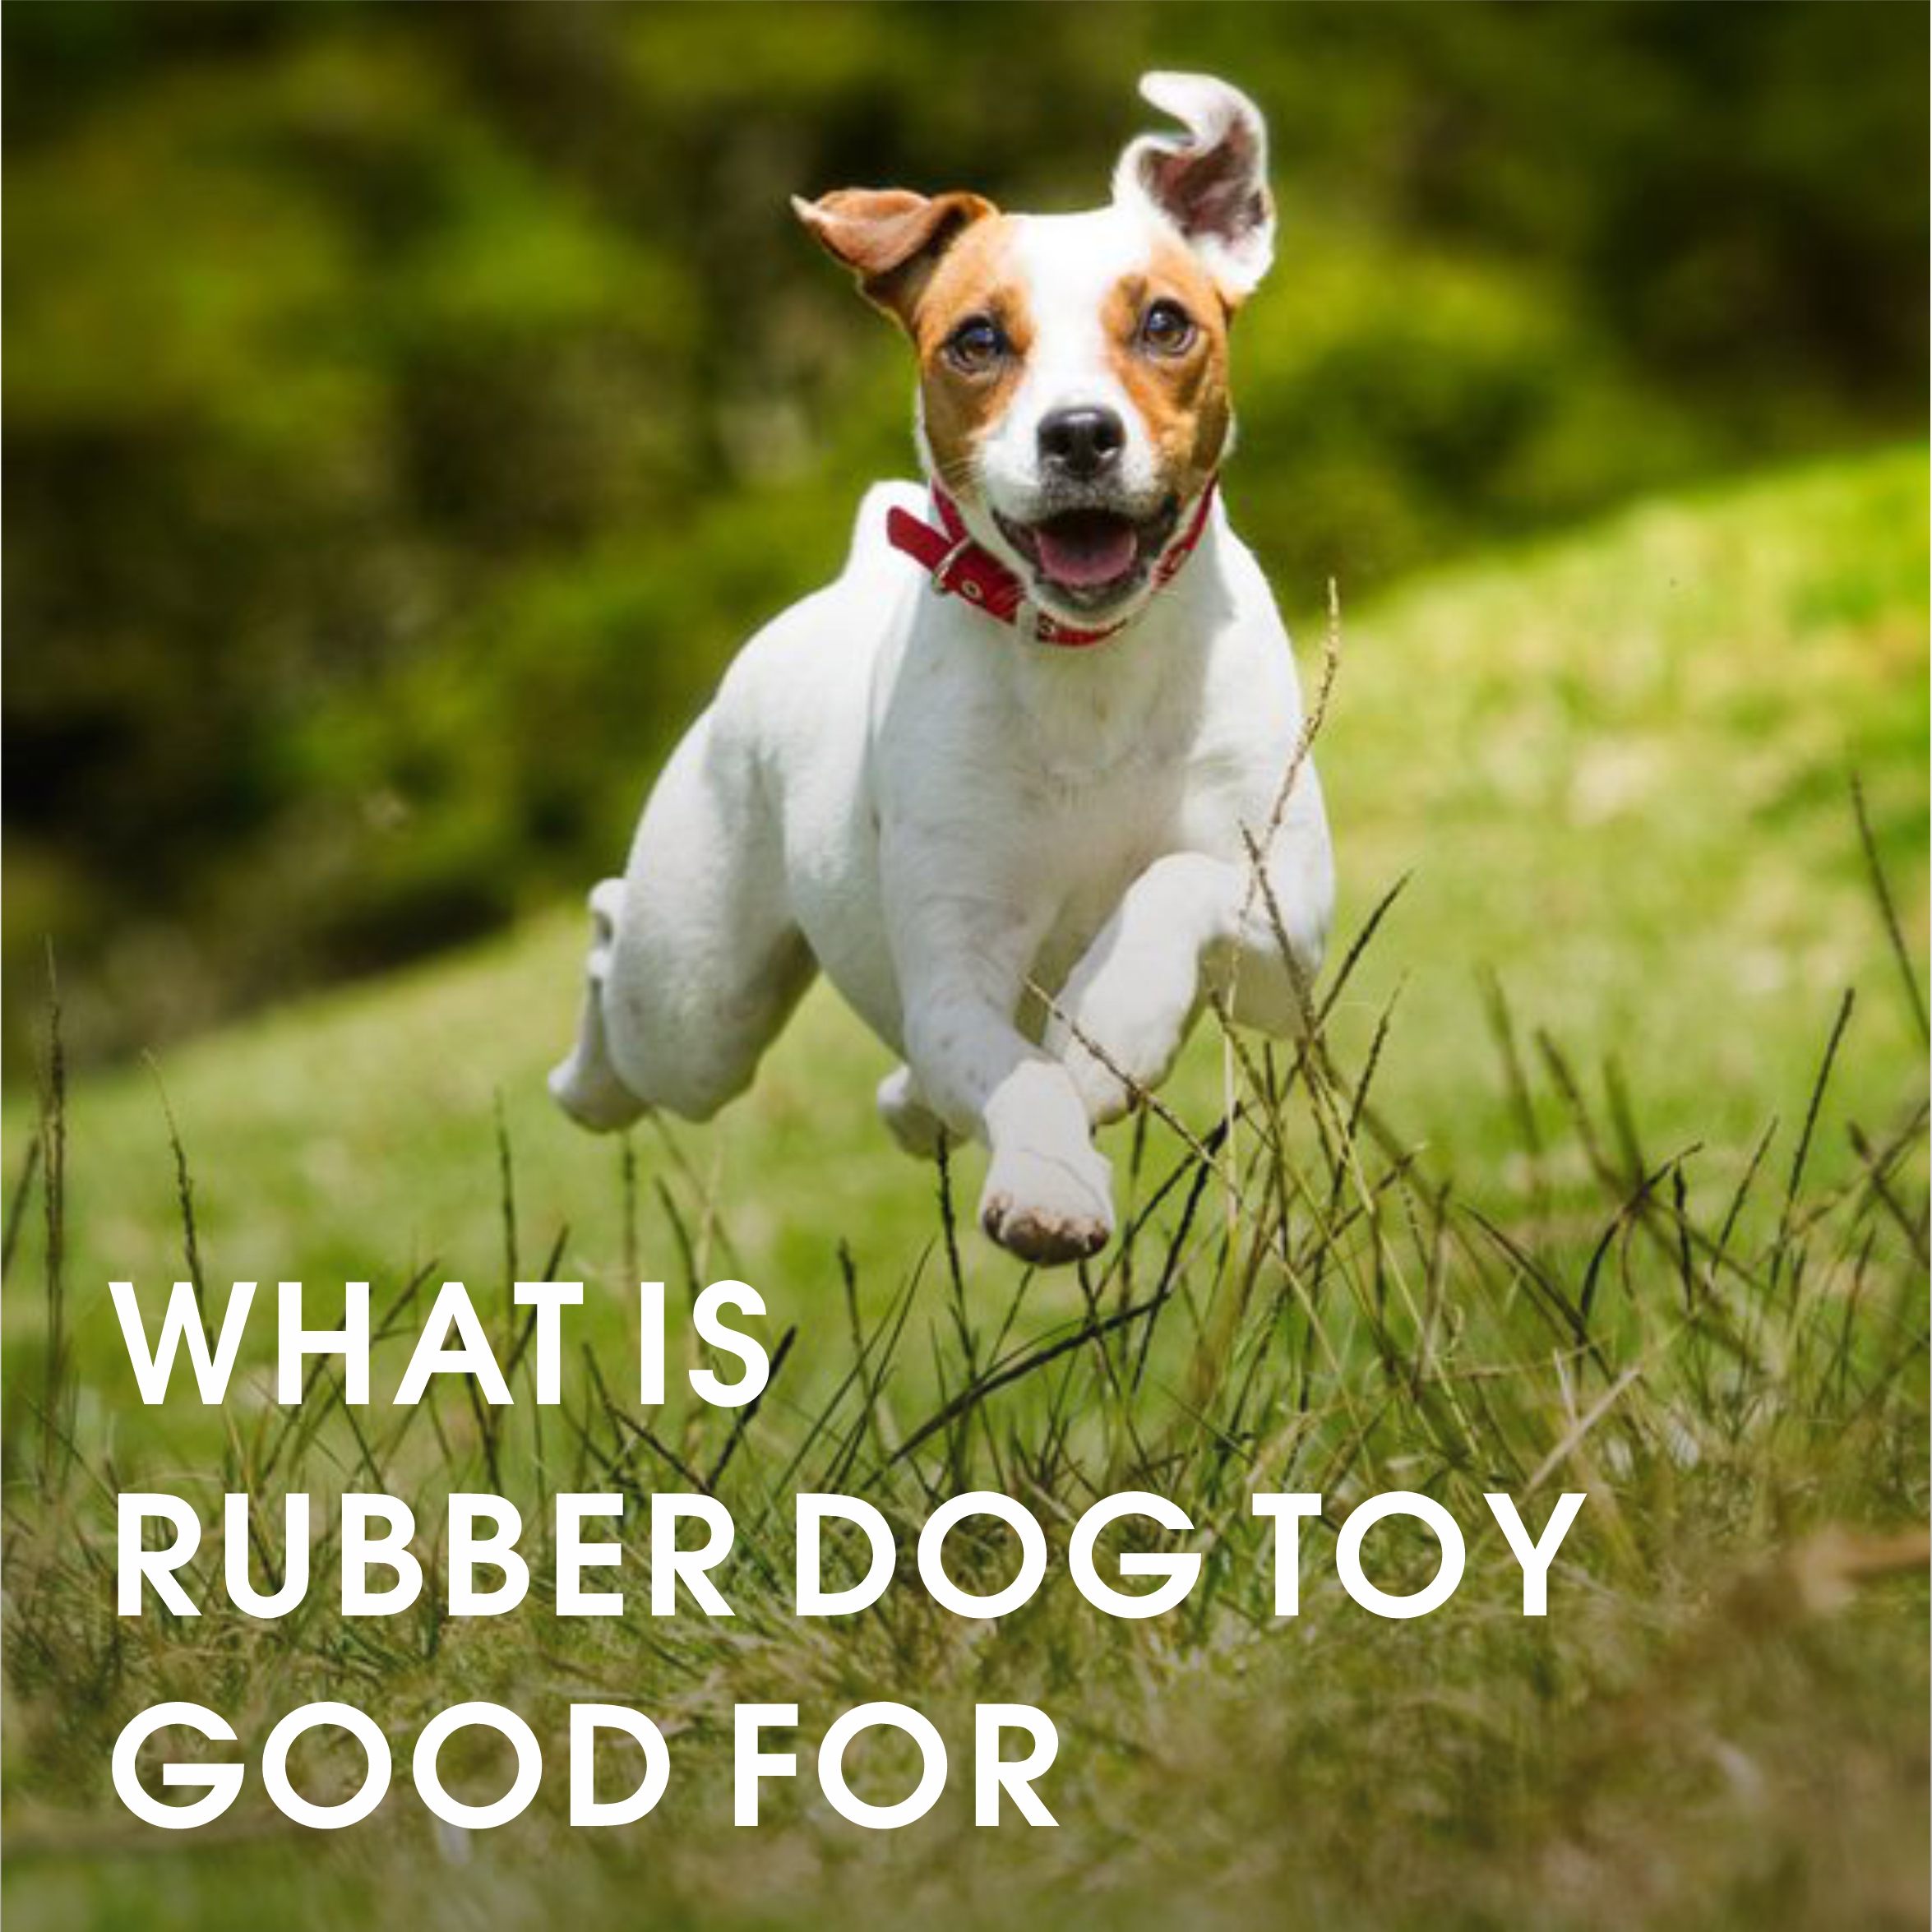 What is rubber dog toy good for?